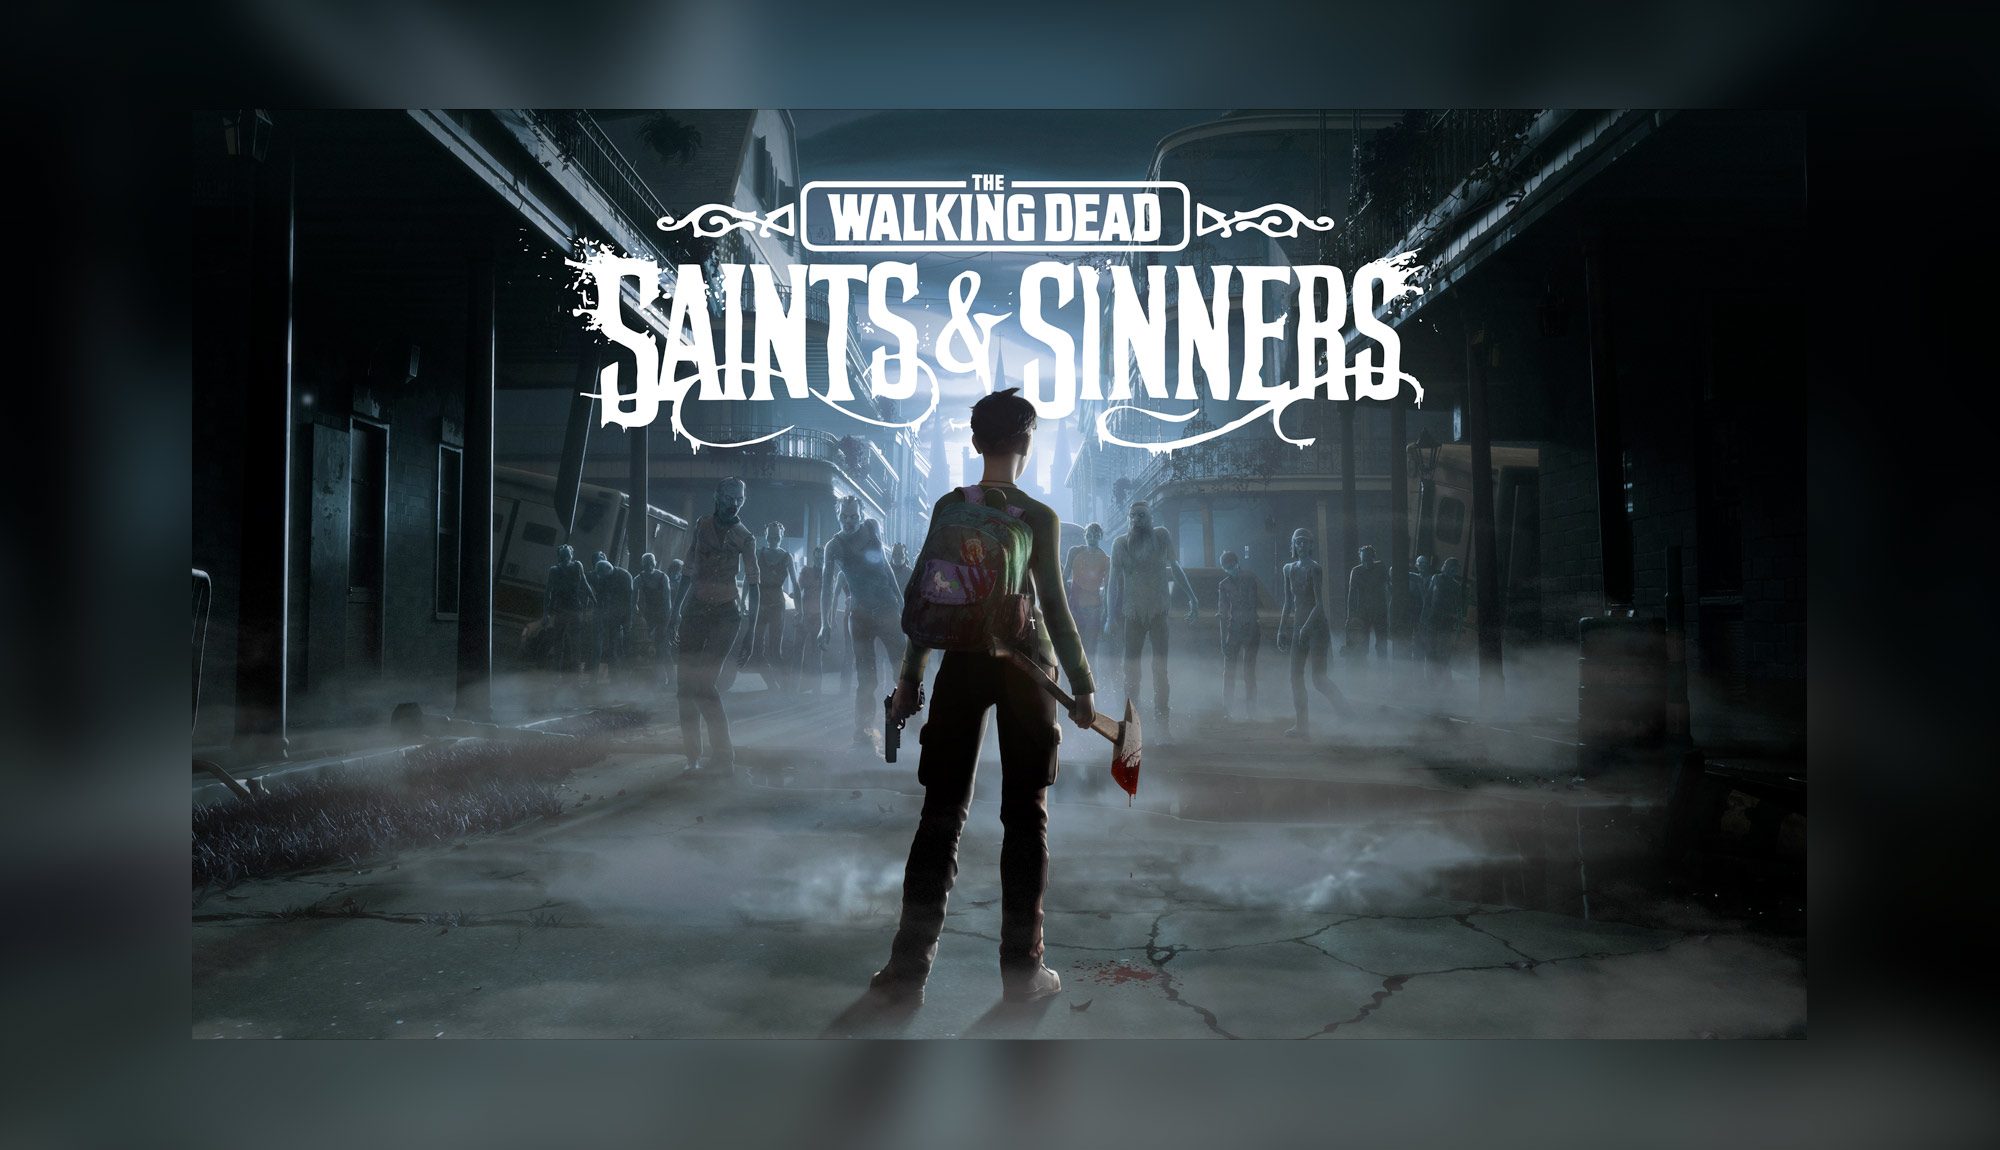 The First Trailer for THE WALKING DEAD: SAINTS & SINNERS!